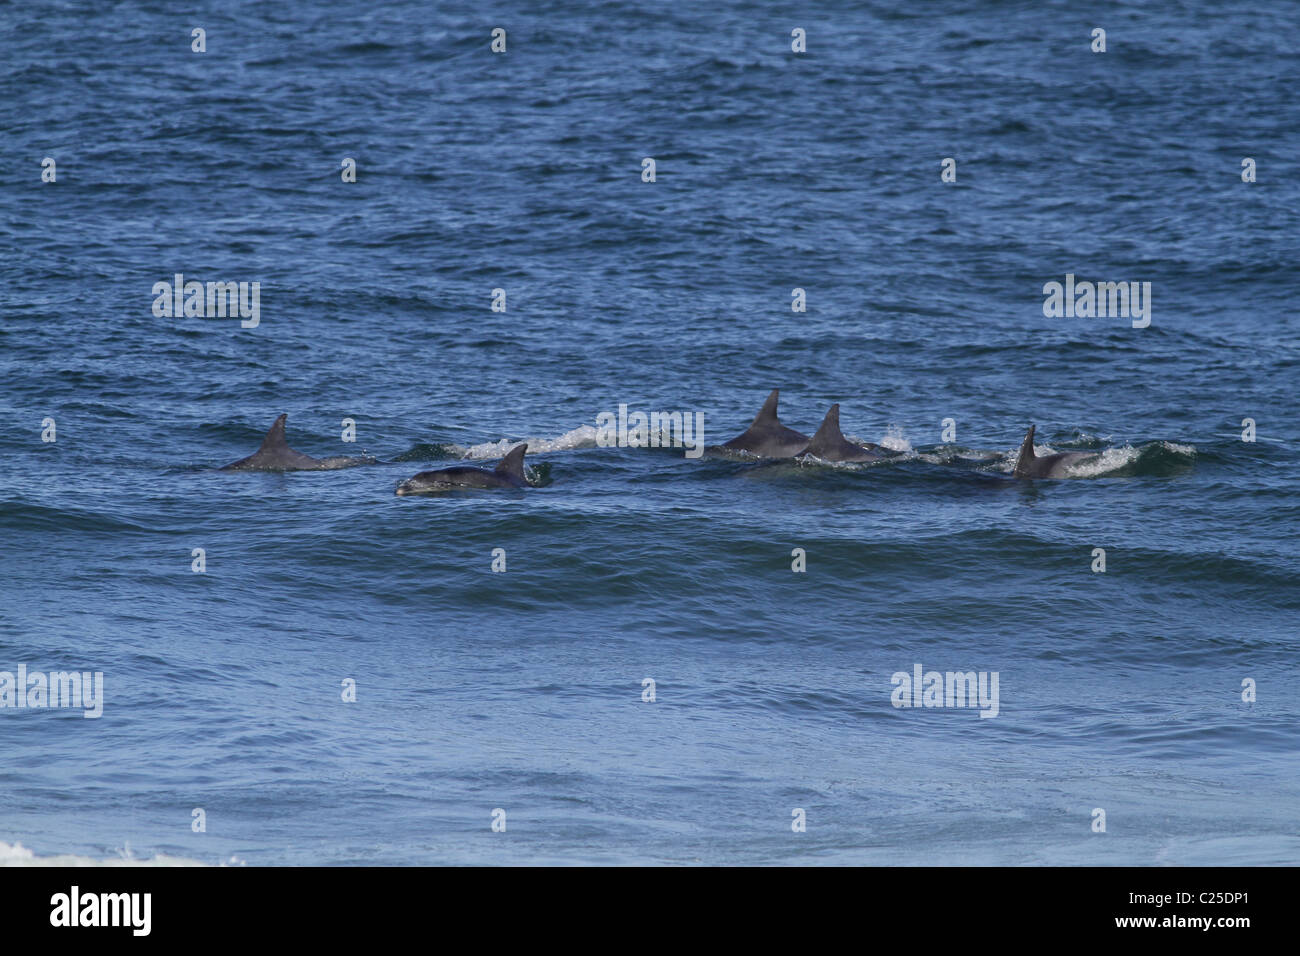 DOLPHIN POD IN INDIAN OCEAN JEFFREY'S BAY EASTERN CAPE SOUTH AFRICA 26 January 2011 Stock Photo